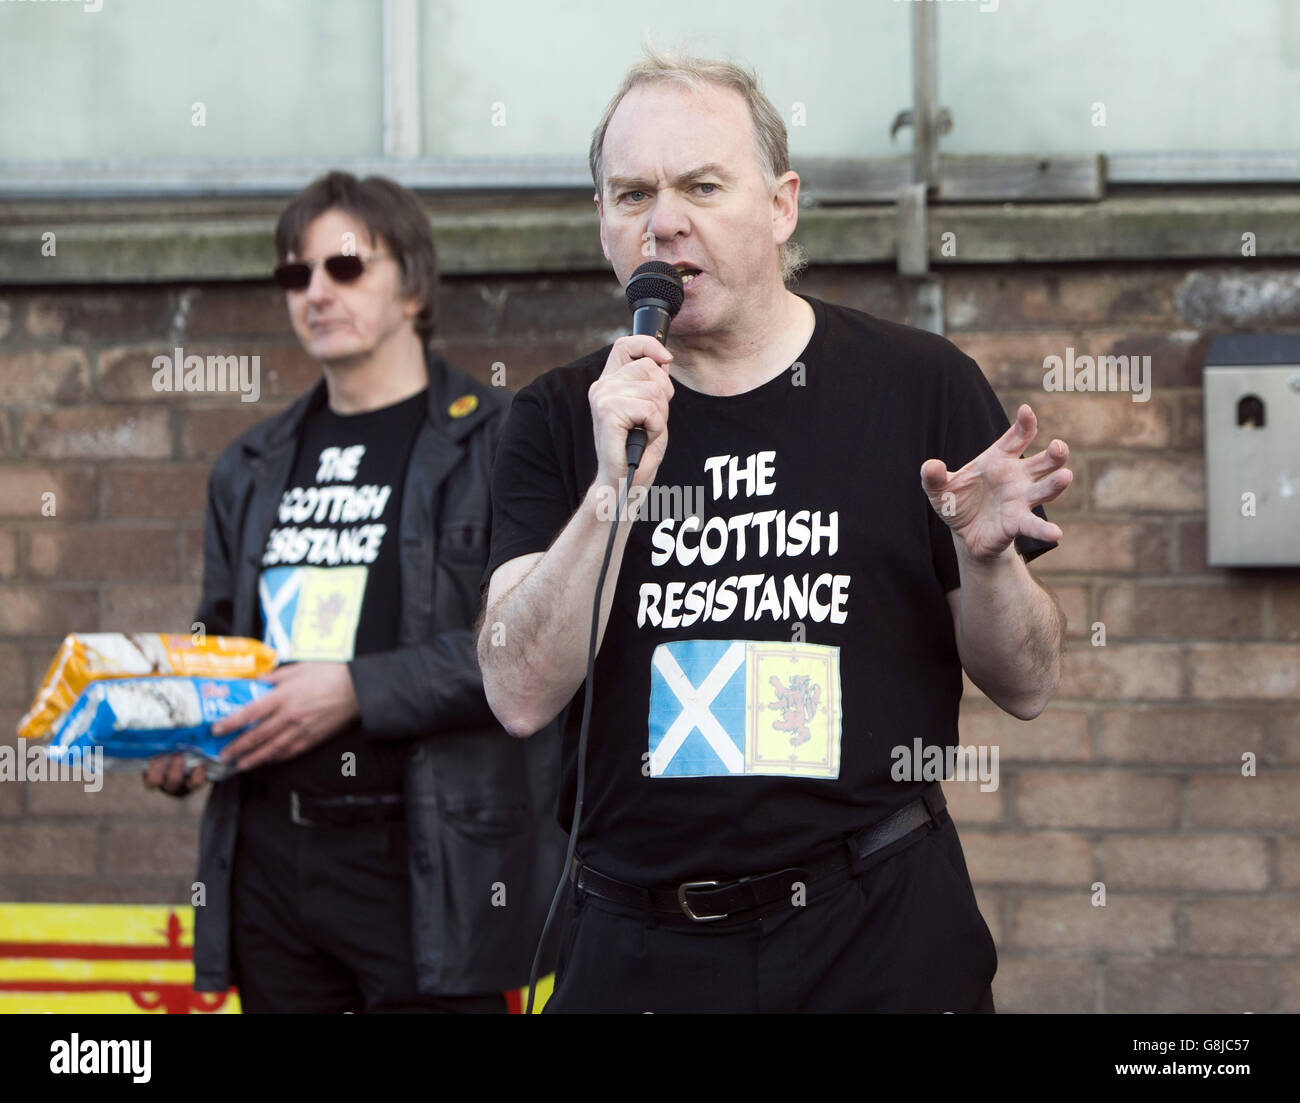 Activists Sean Clerkin (right) and James Scott from the Scottish Resistance group take part in a protest outside Tunnock's factory in Uddingston, Lanarkshire, a week after the firm advertised its best-selling biscuit as the Great British Tea Cake. Stock Photo